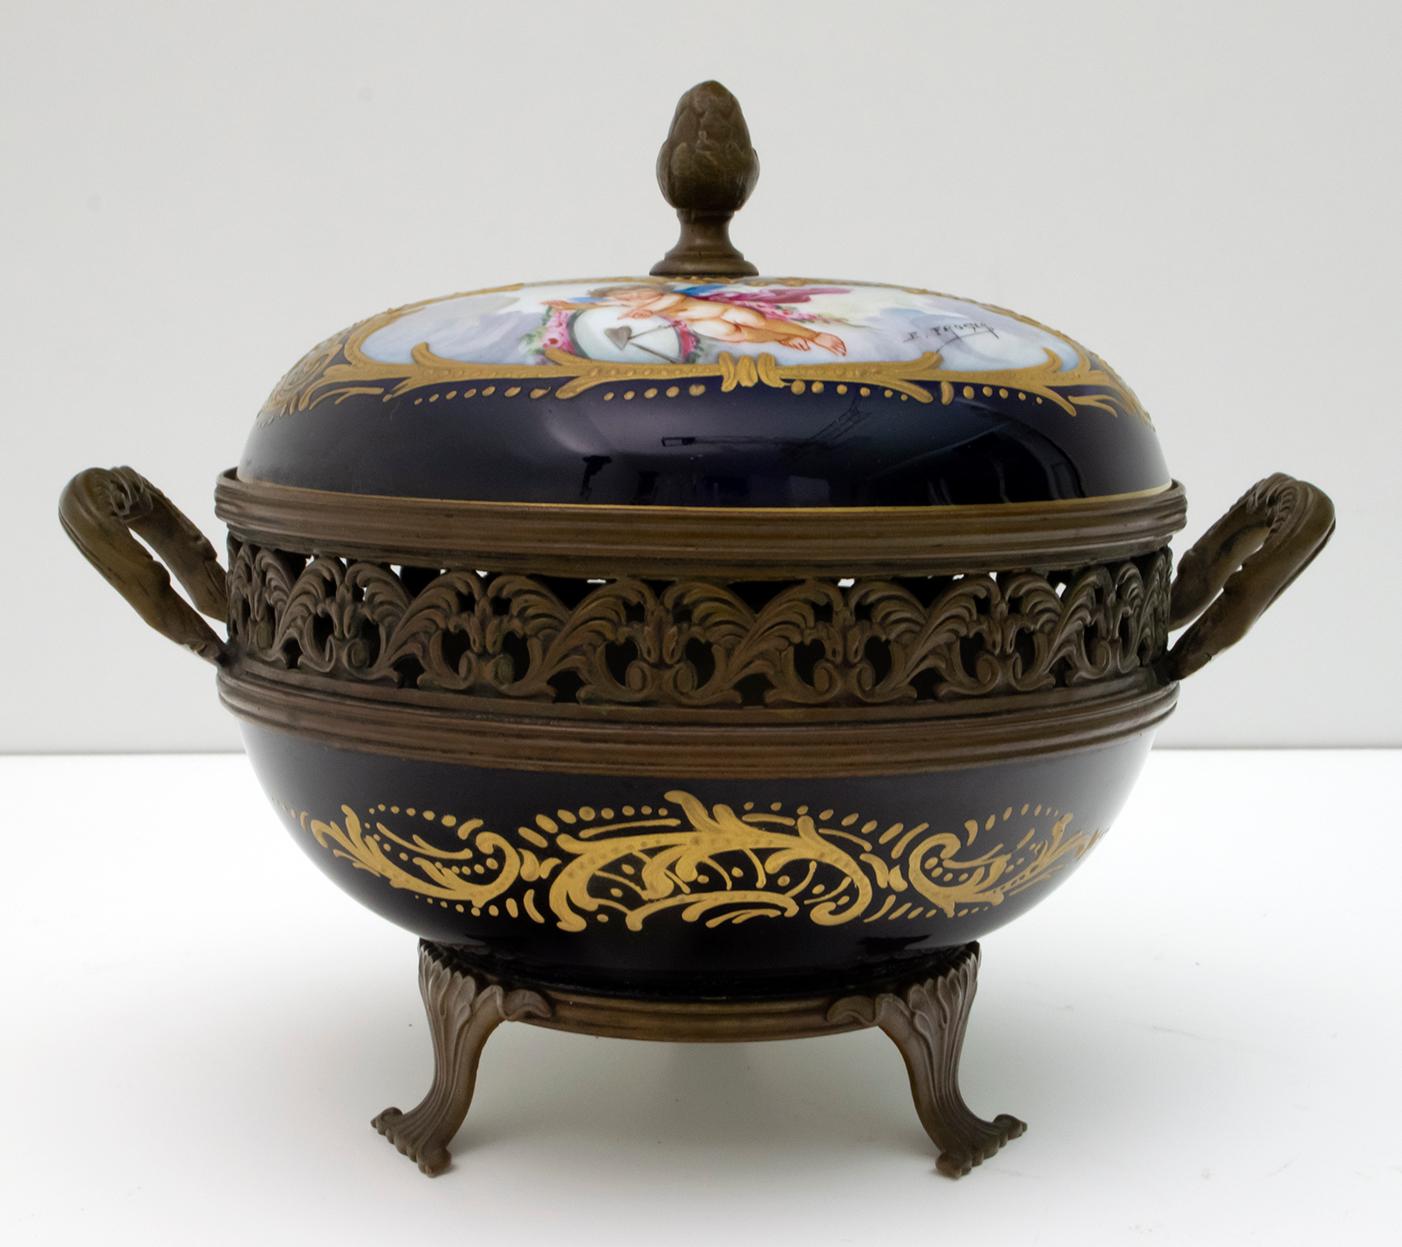 Signed E. Froger 19th Century French Porcelain Potpourri by Sevres, 1880 In Good Condition For Sale In Puglia, Puglia